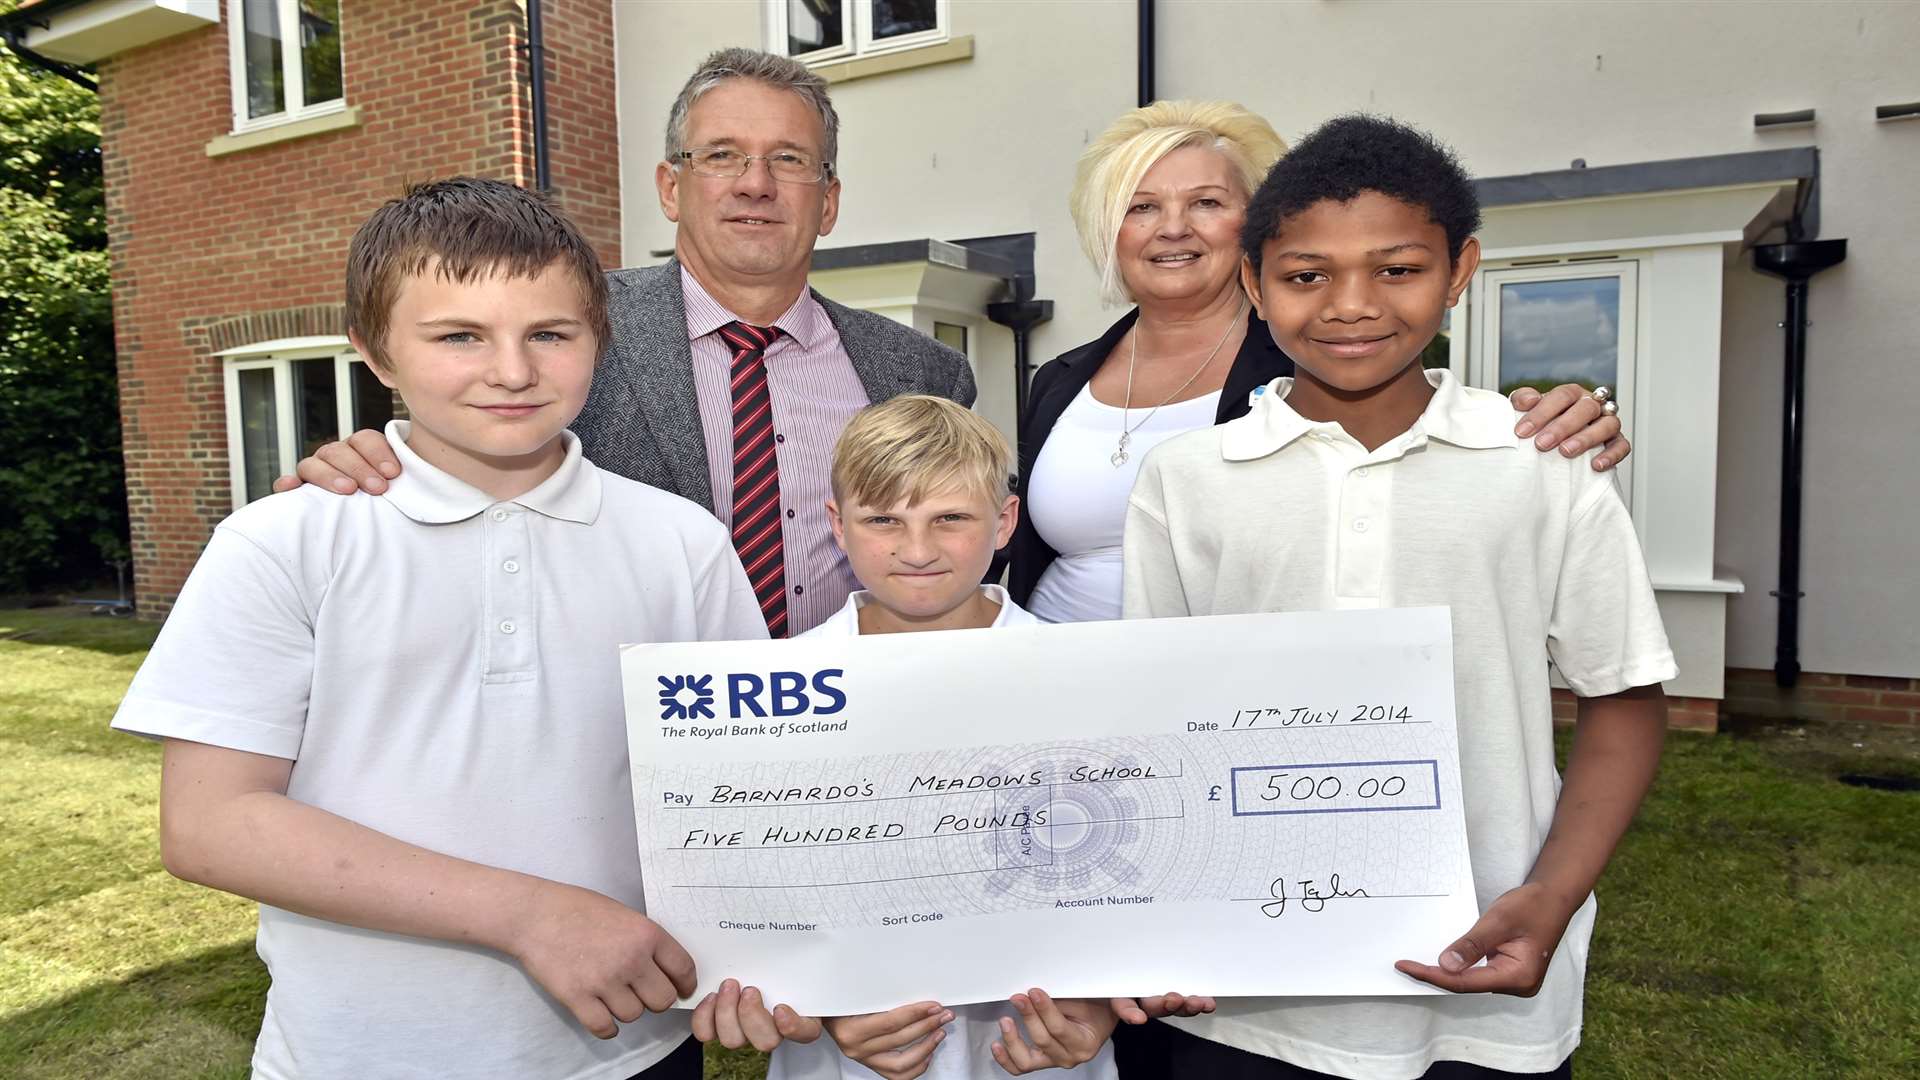 Children from years six and seven at Barnardo's Meadows School, Josh (12), Cameron (10) and Joanito (11) with school principal Mike Price accepting a cheque for £500 to purchase outdoor activity equipment for the school